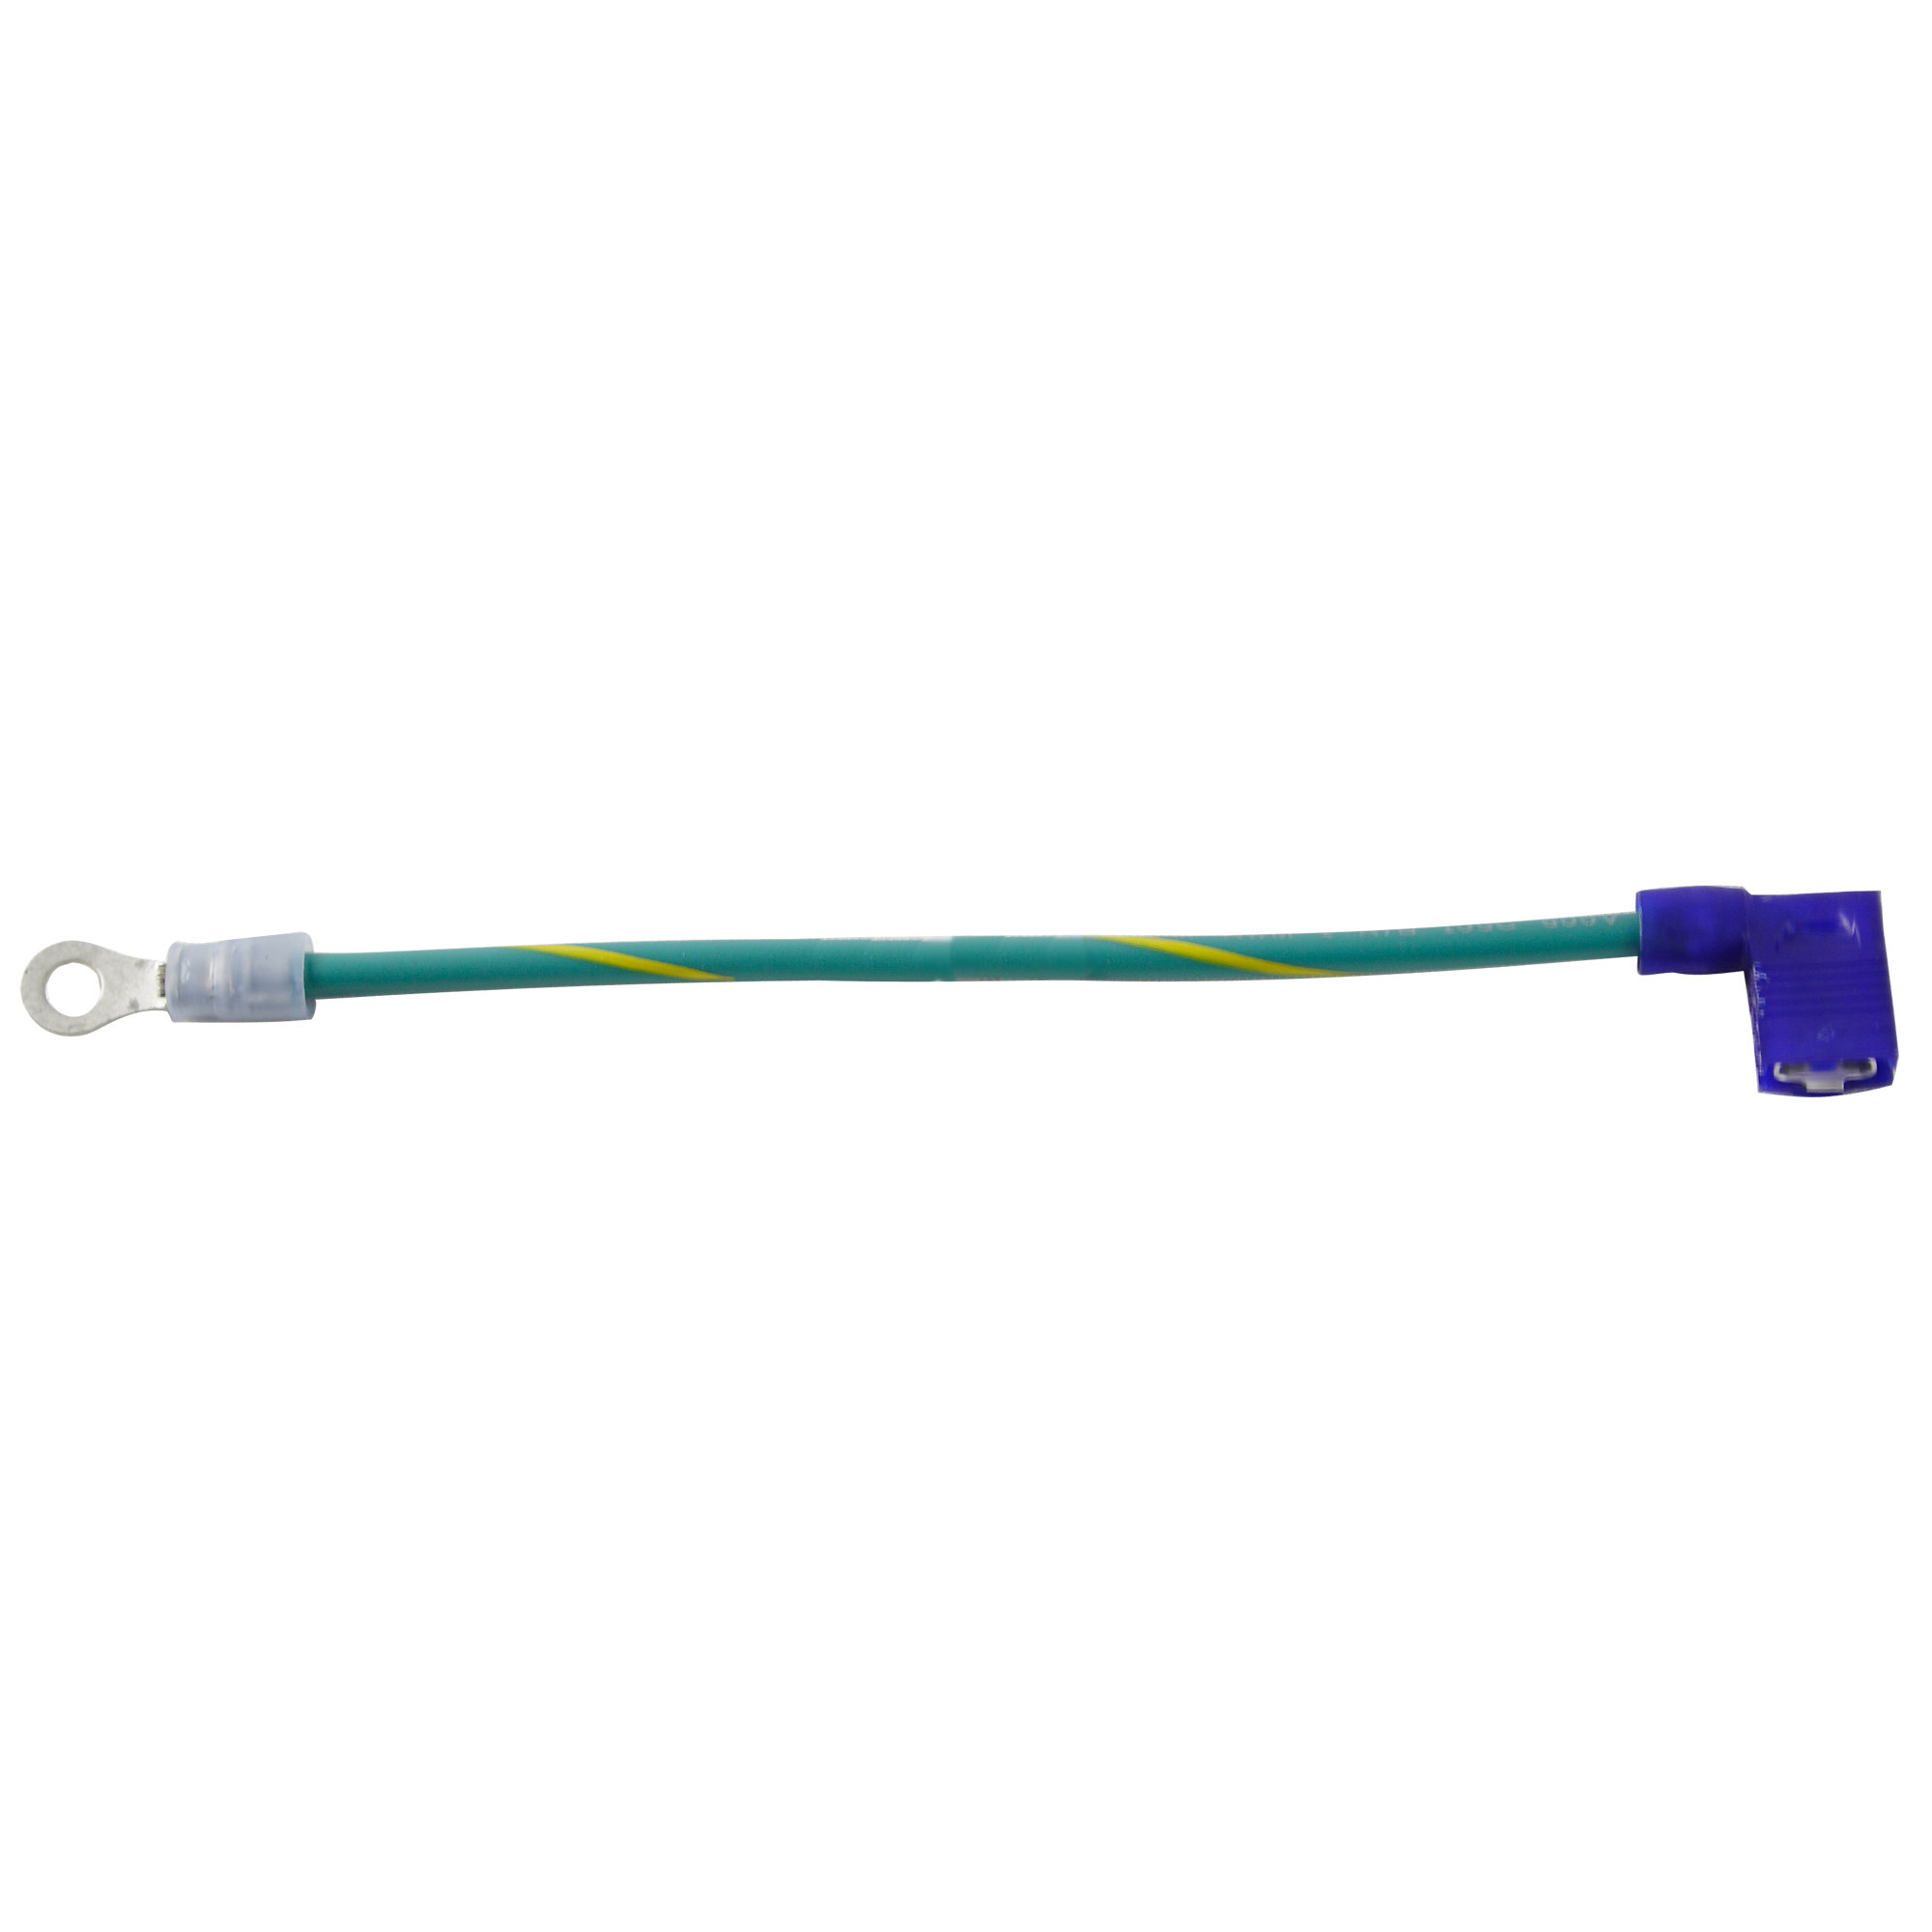 5" Green/Yellow Jumper Cable